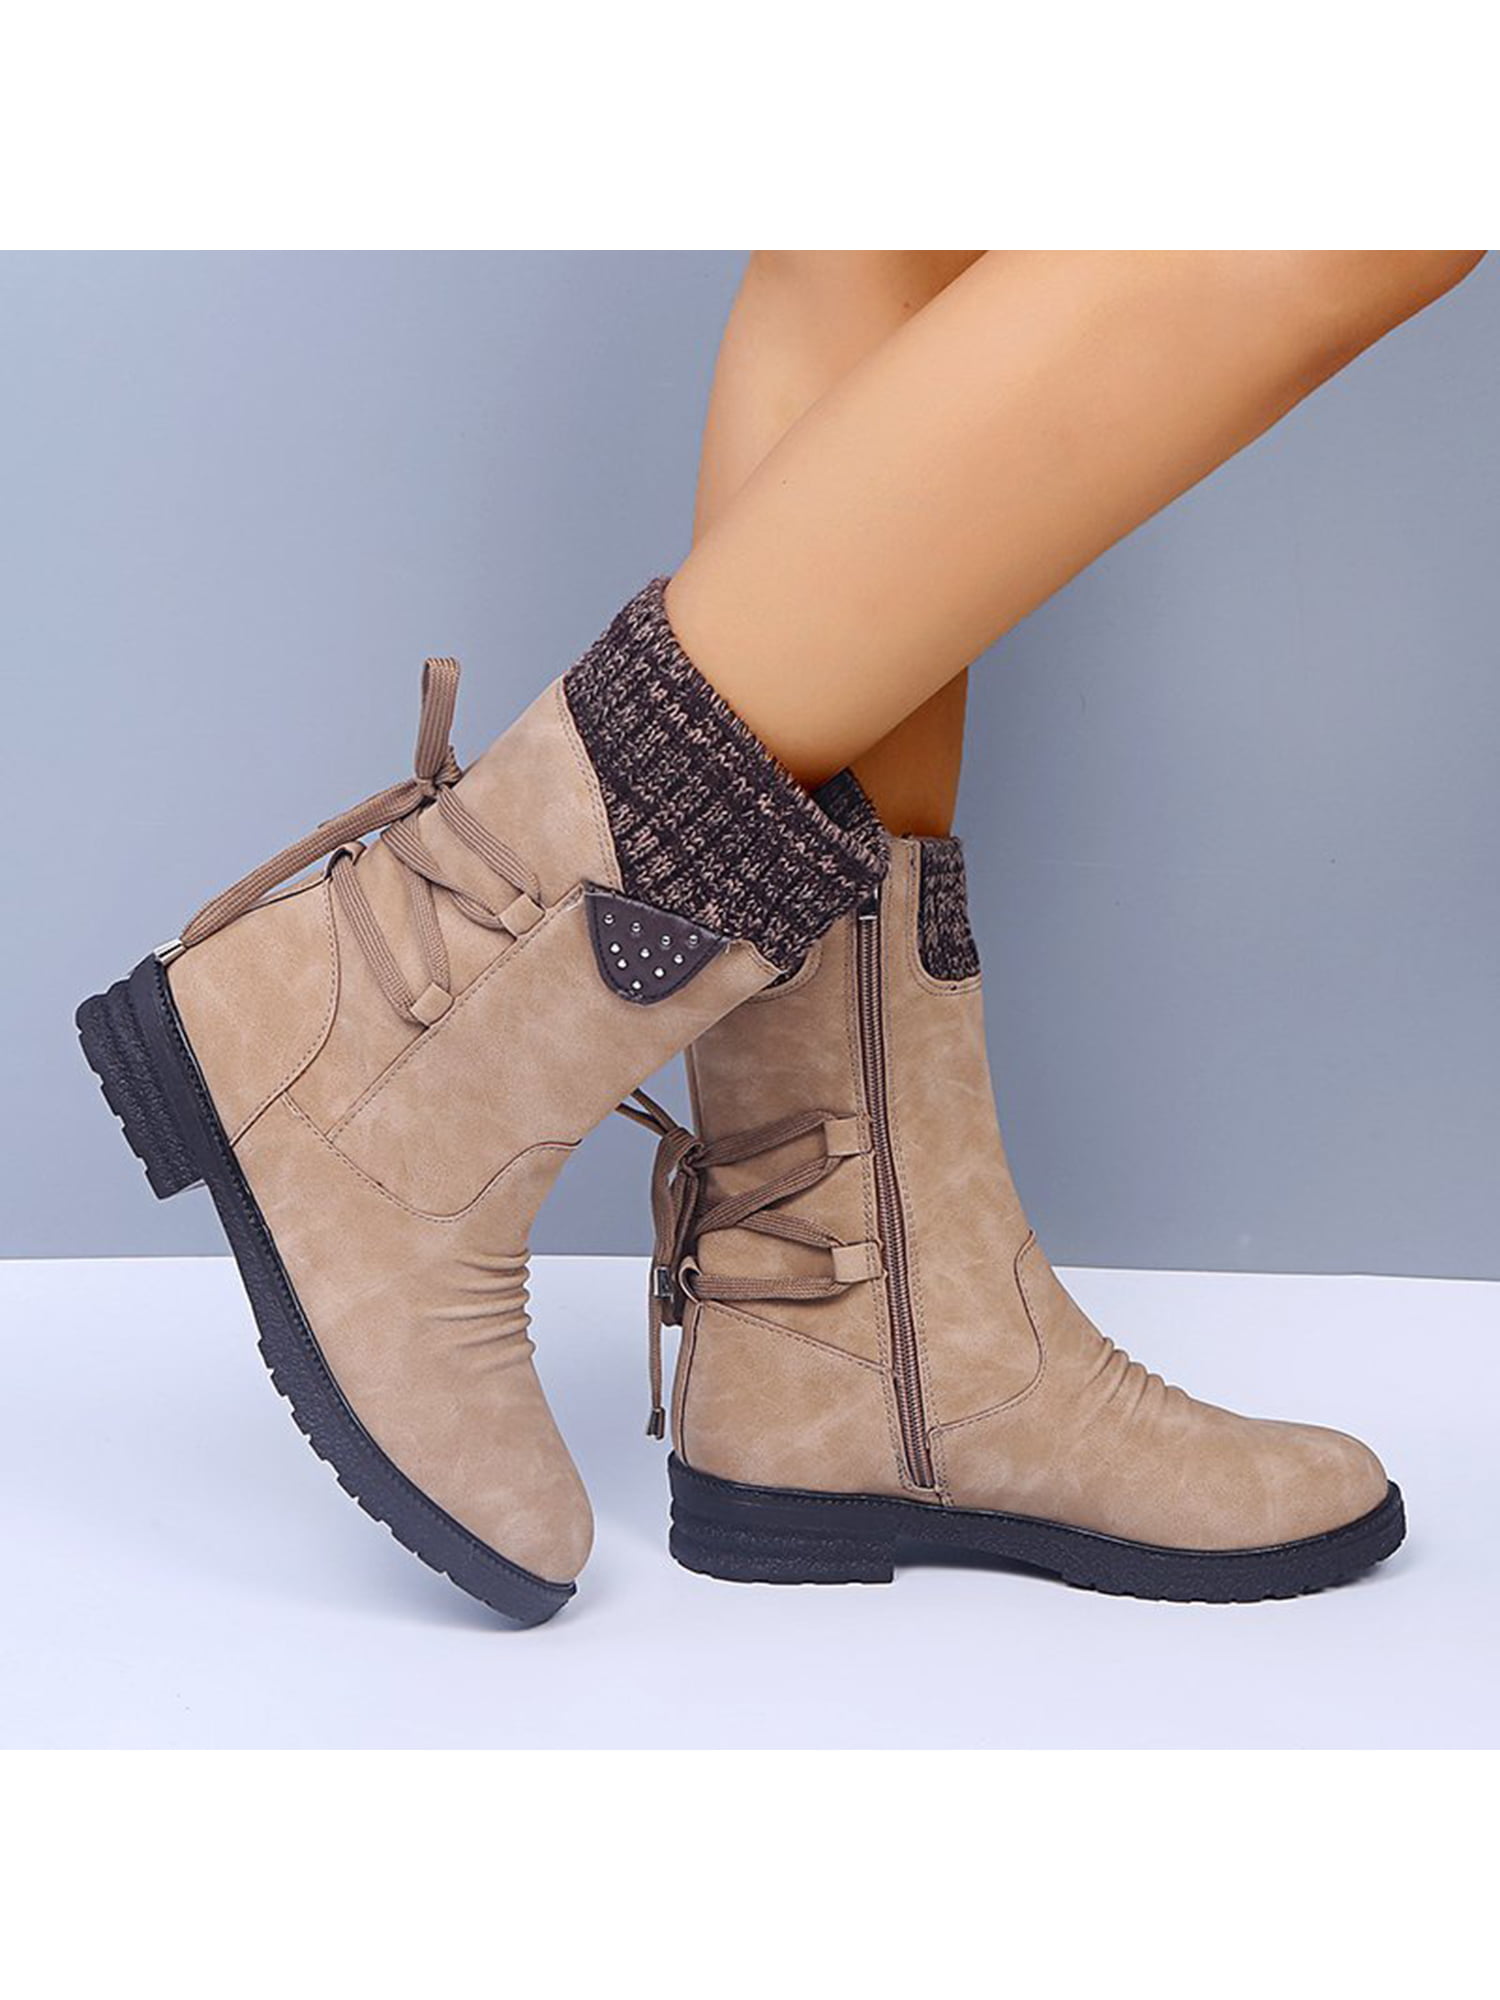 Details about   Womens winter Warm furry trim Snow Mid Calf Boots stiletto Heels Solid Shoes new 